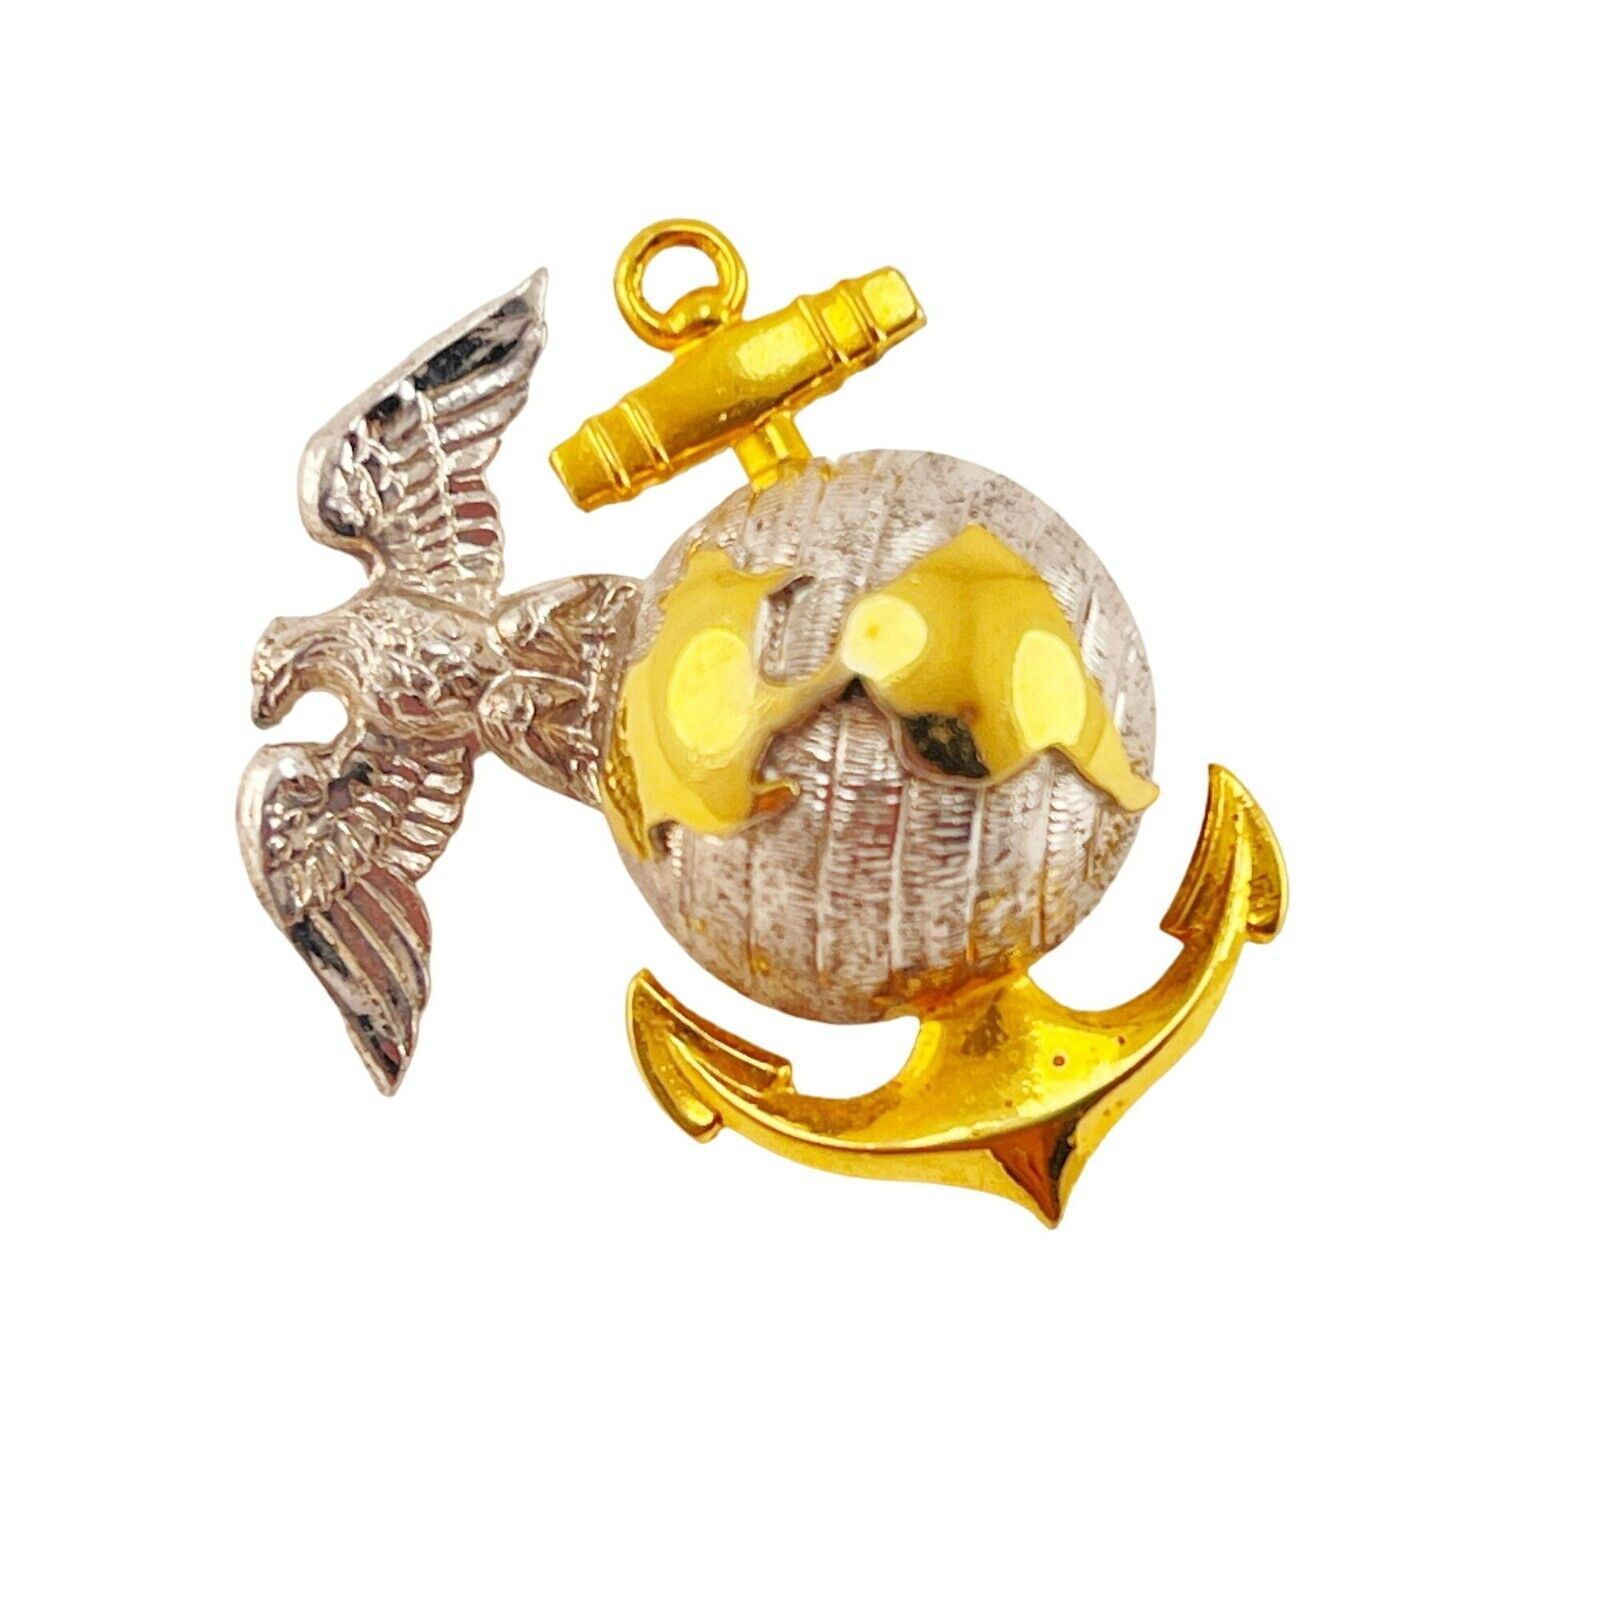 Vintage Marines Anchor and Globe Eagle Hat Pin Gold and Silver Tone